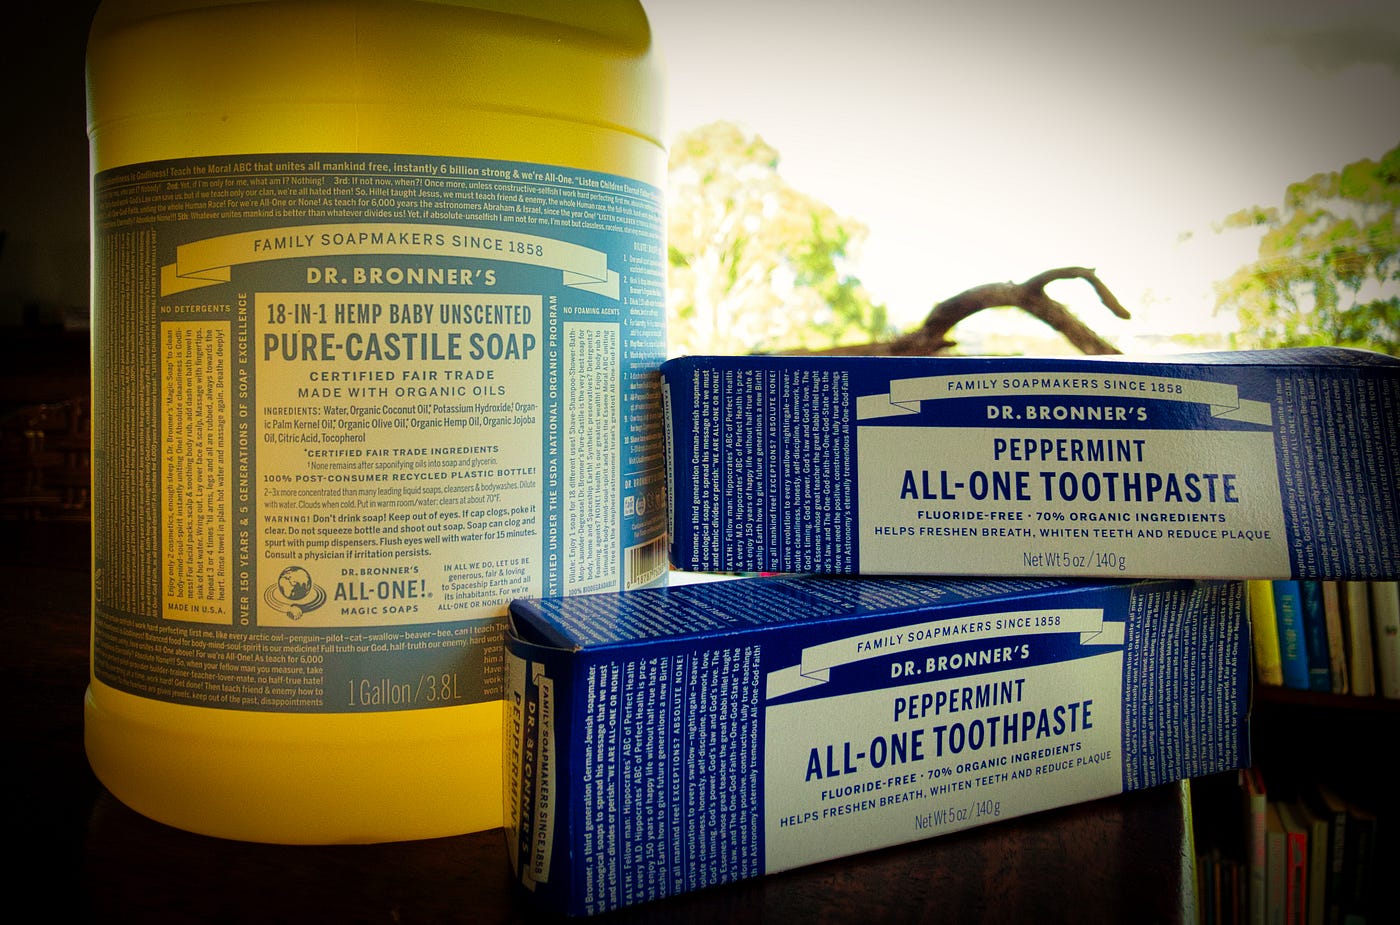 The Peculiar History Behind Dr. Bronner's Magic Soap